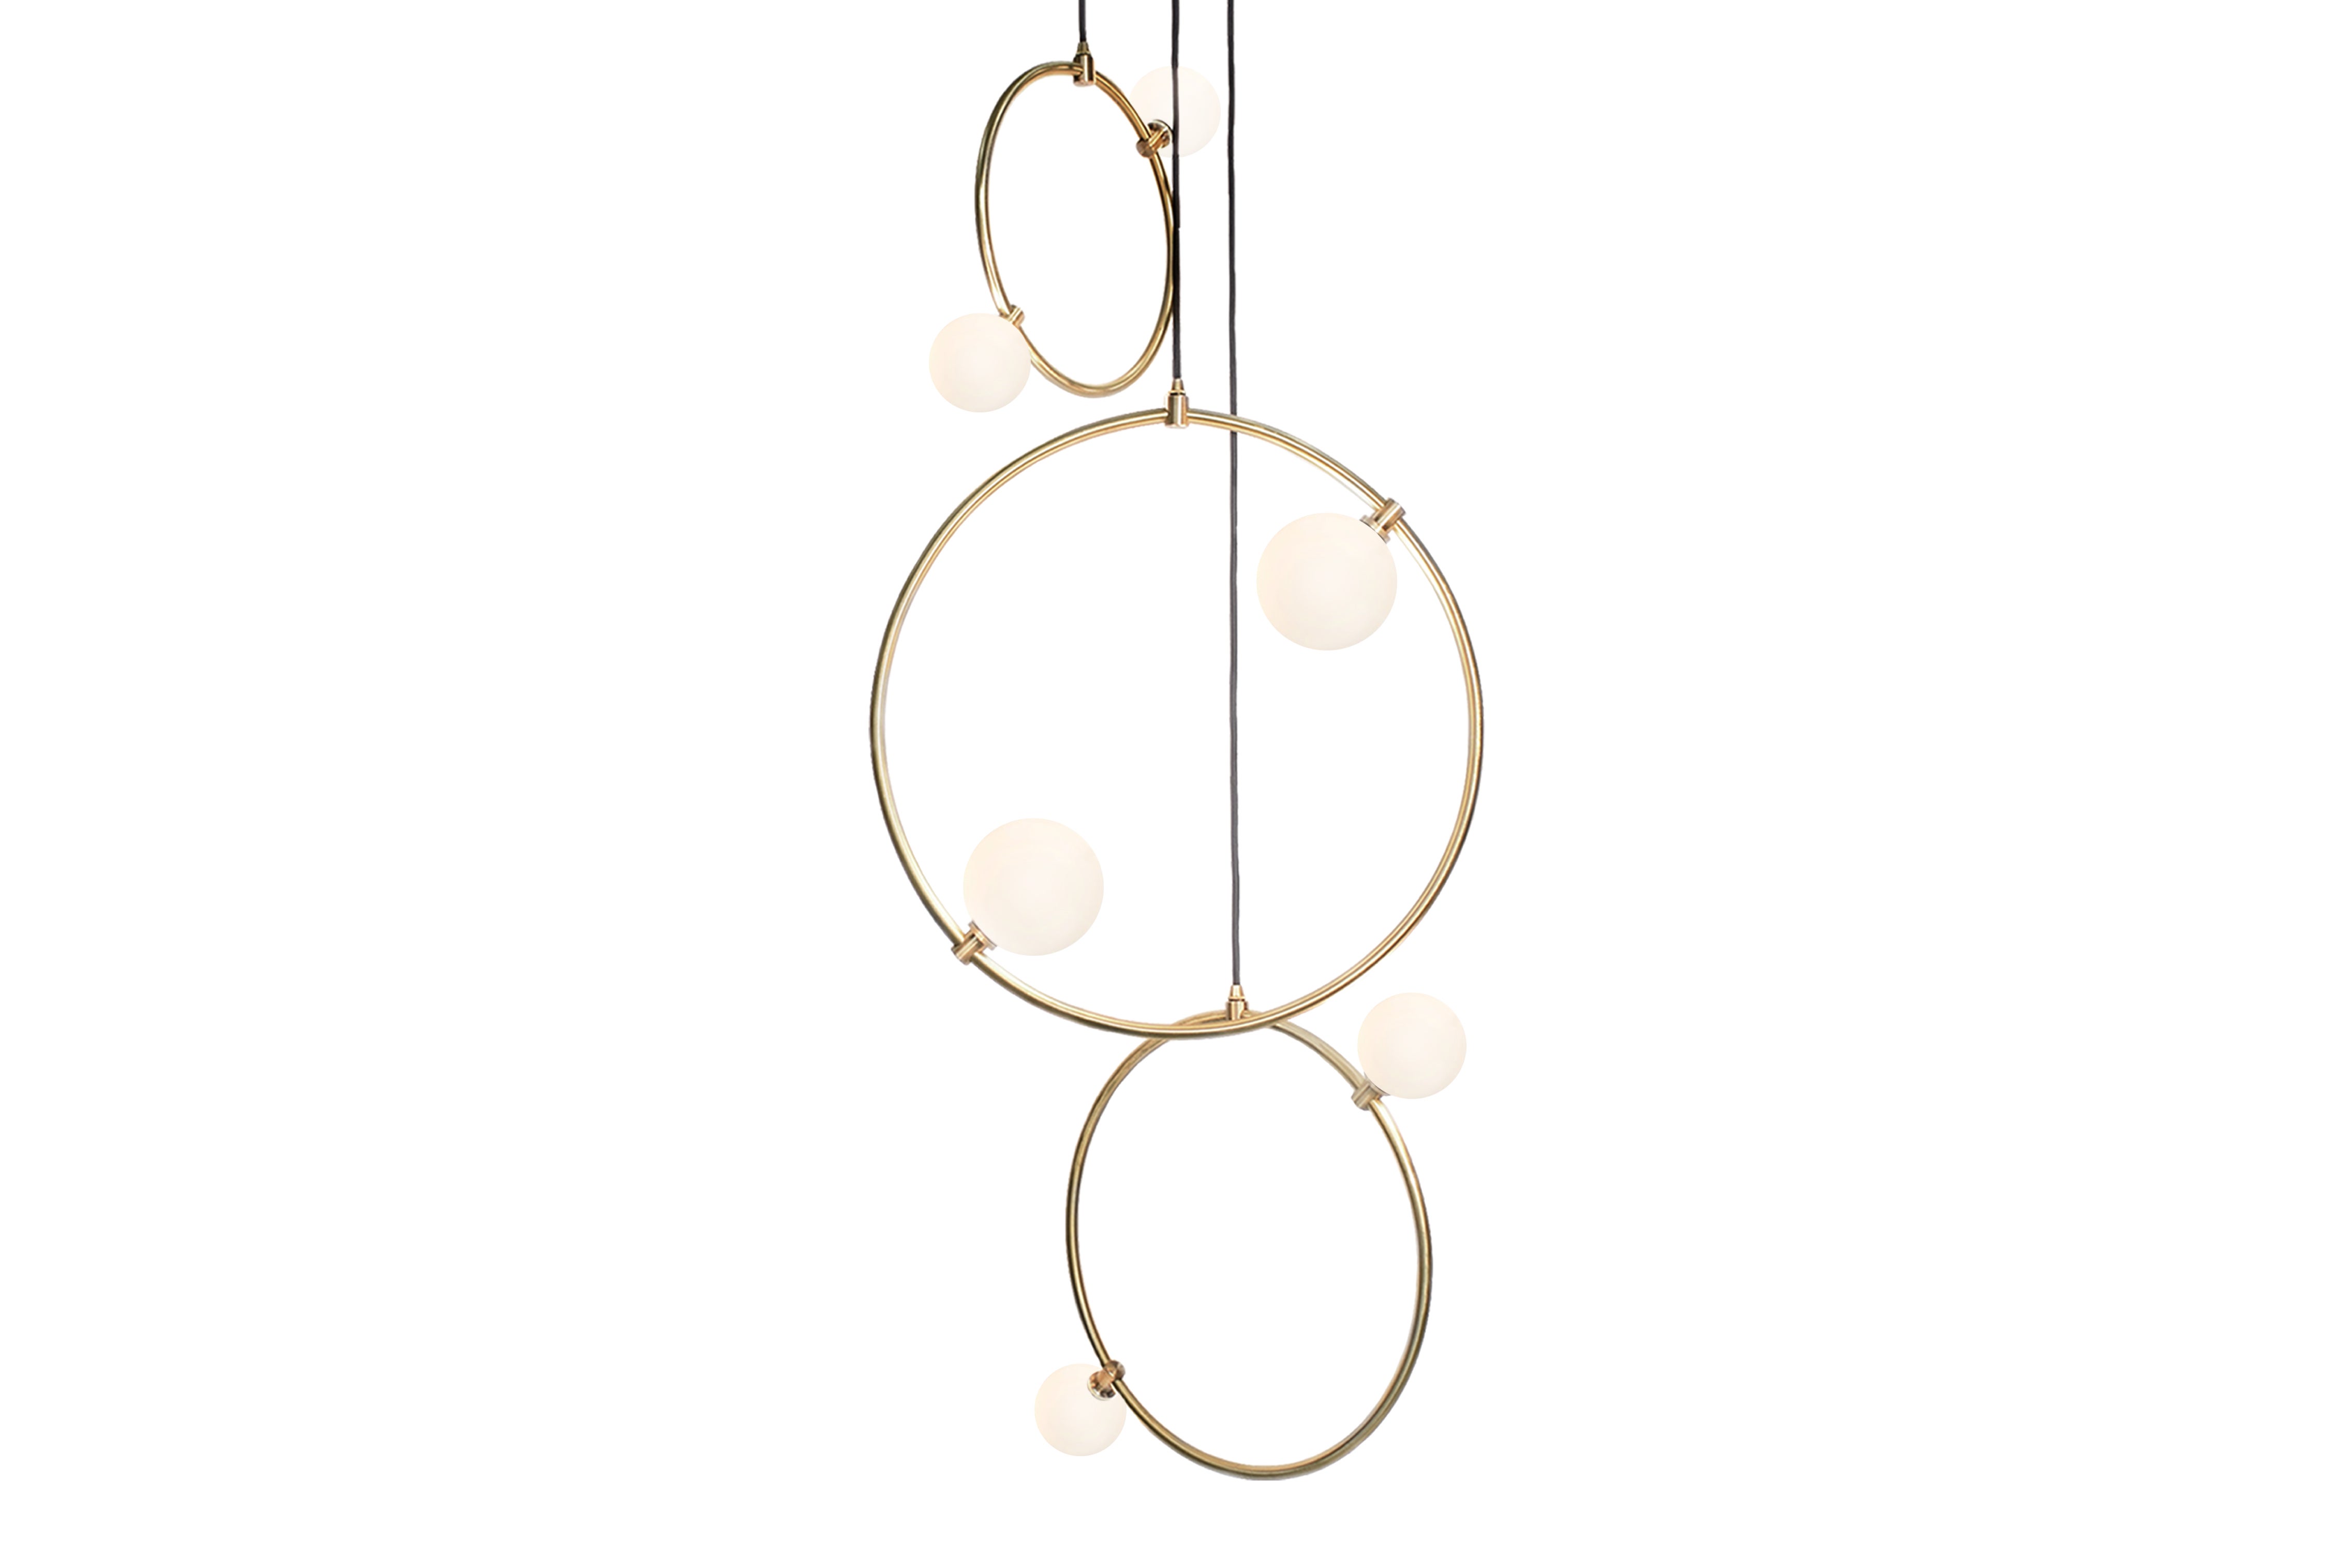 'Drops 3 Piece' by Marc Wood. Handmade Brass Ring Lamps, Opal Glass Shades